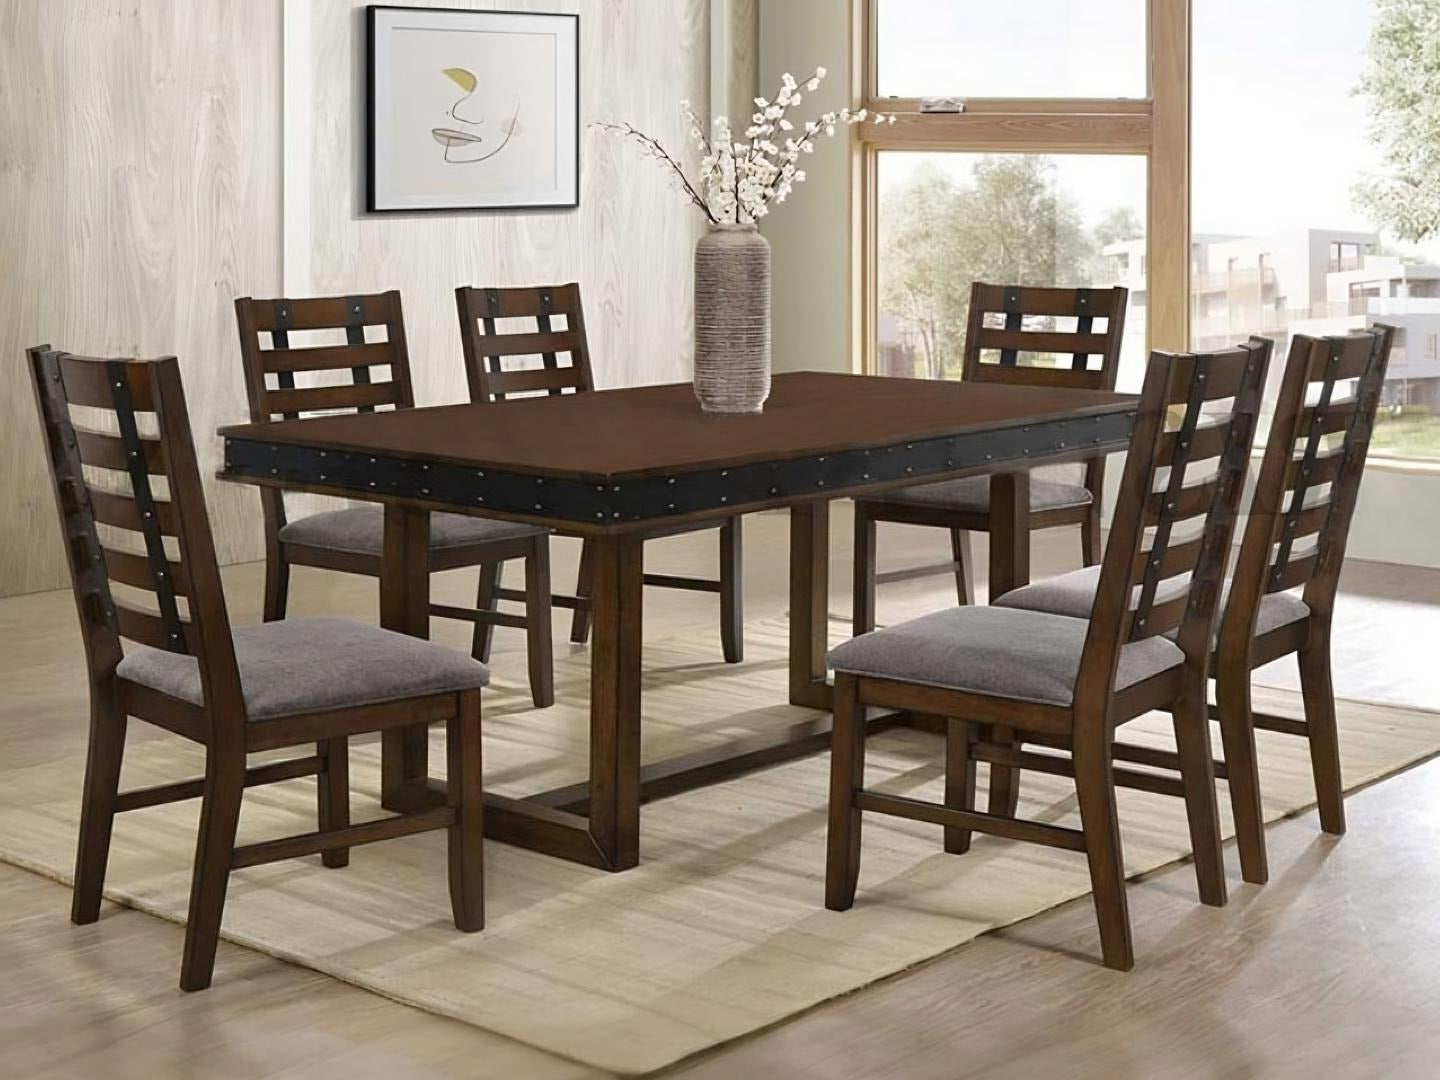 thronos solid wood dining table - Lux Furniture